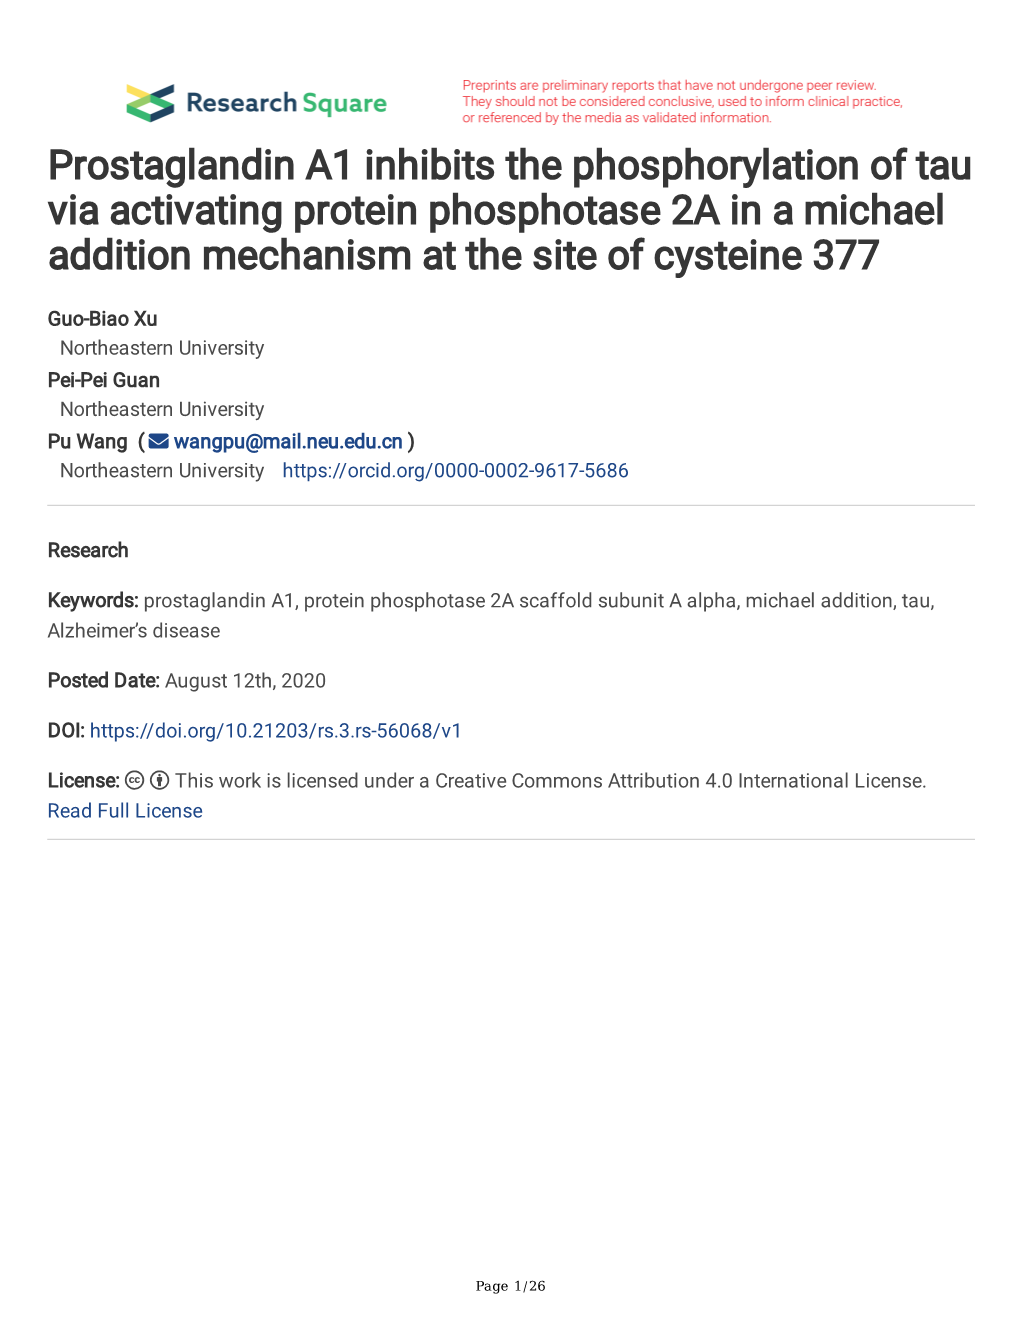 Prostaglandin A1 Inhibits the Phosphorylation of Tau Via Activating Protein Phosphotase 2A in a Michael Addition Mechanism at the Site of Cysteine 377